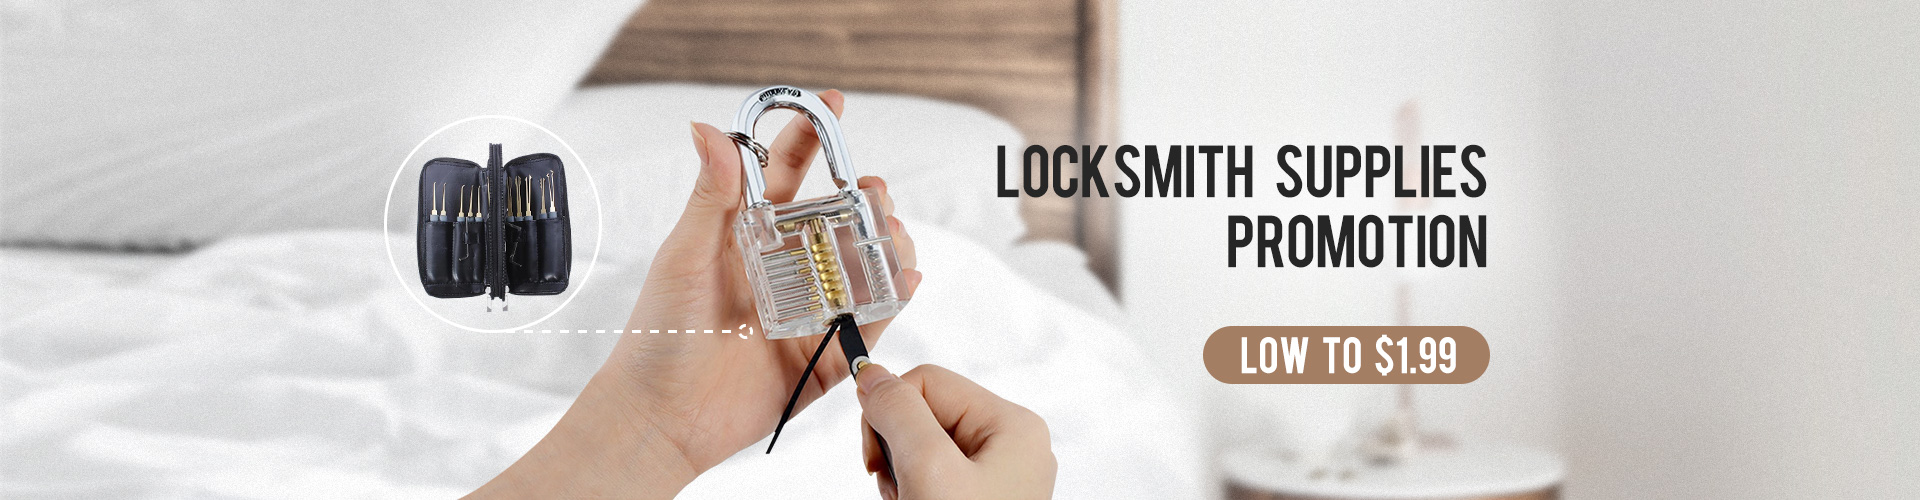 Locksmith Supplies Promotion LOW TO $1.99